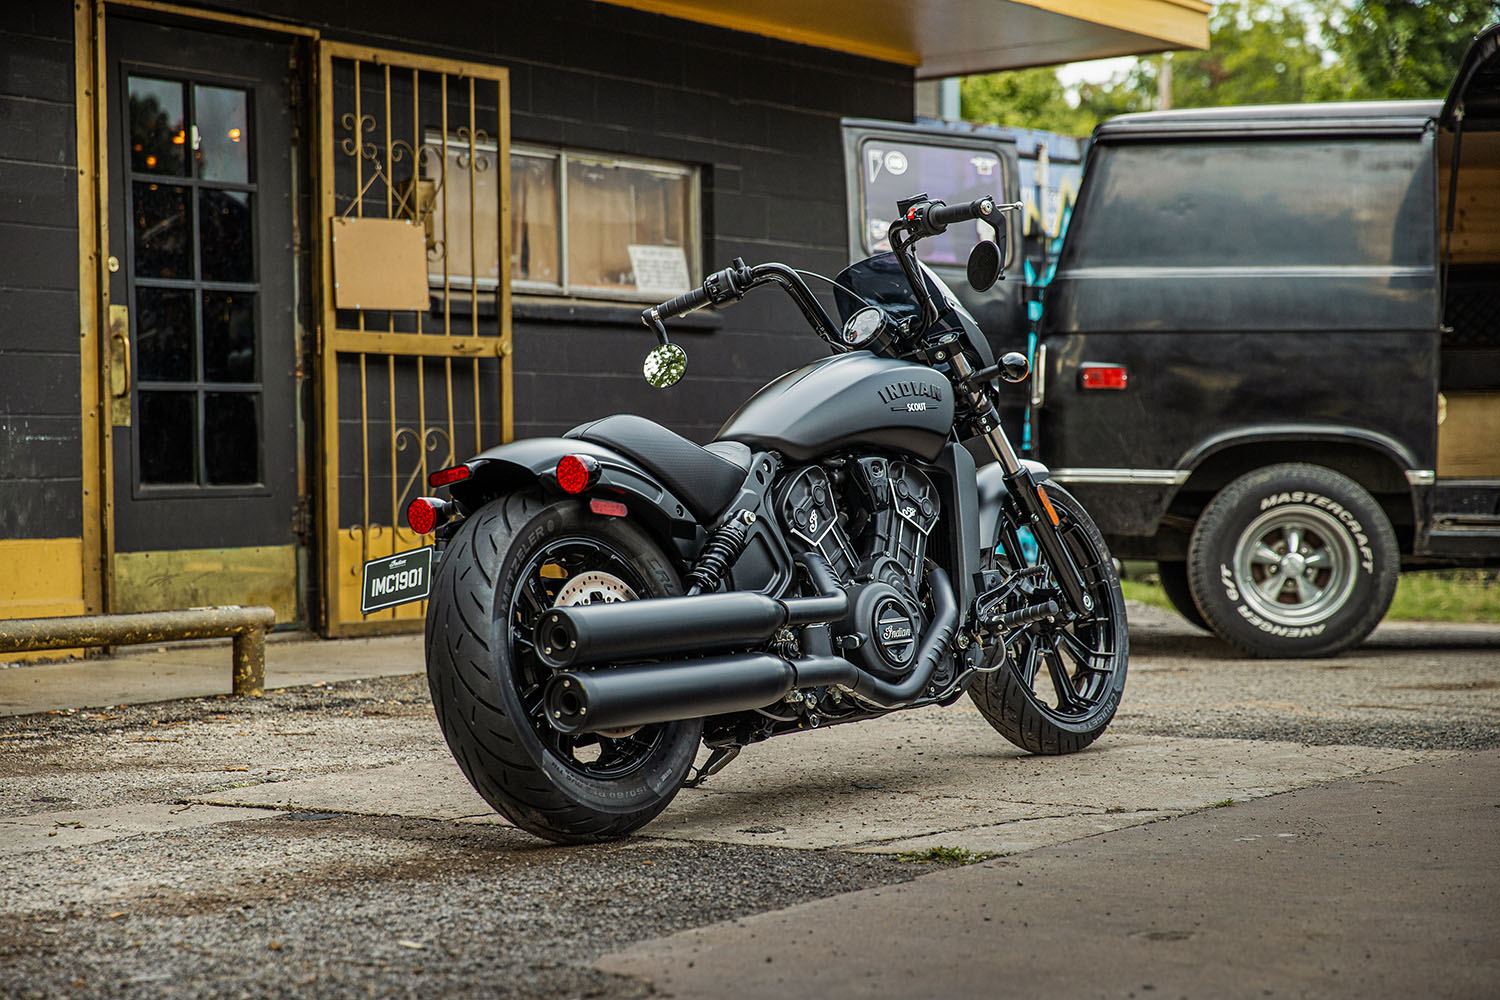 2022 Indian Scout® Rogue ABS in San Diego, California - Photo 23